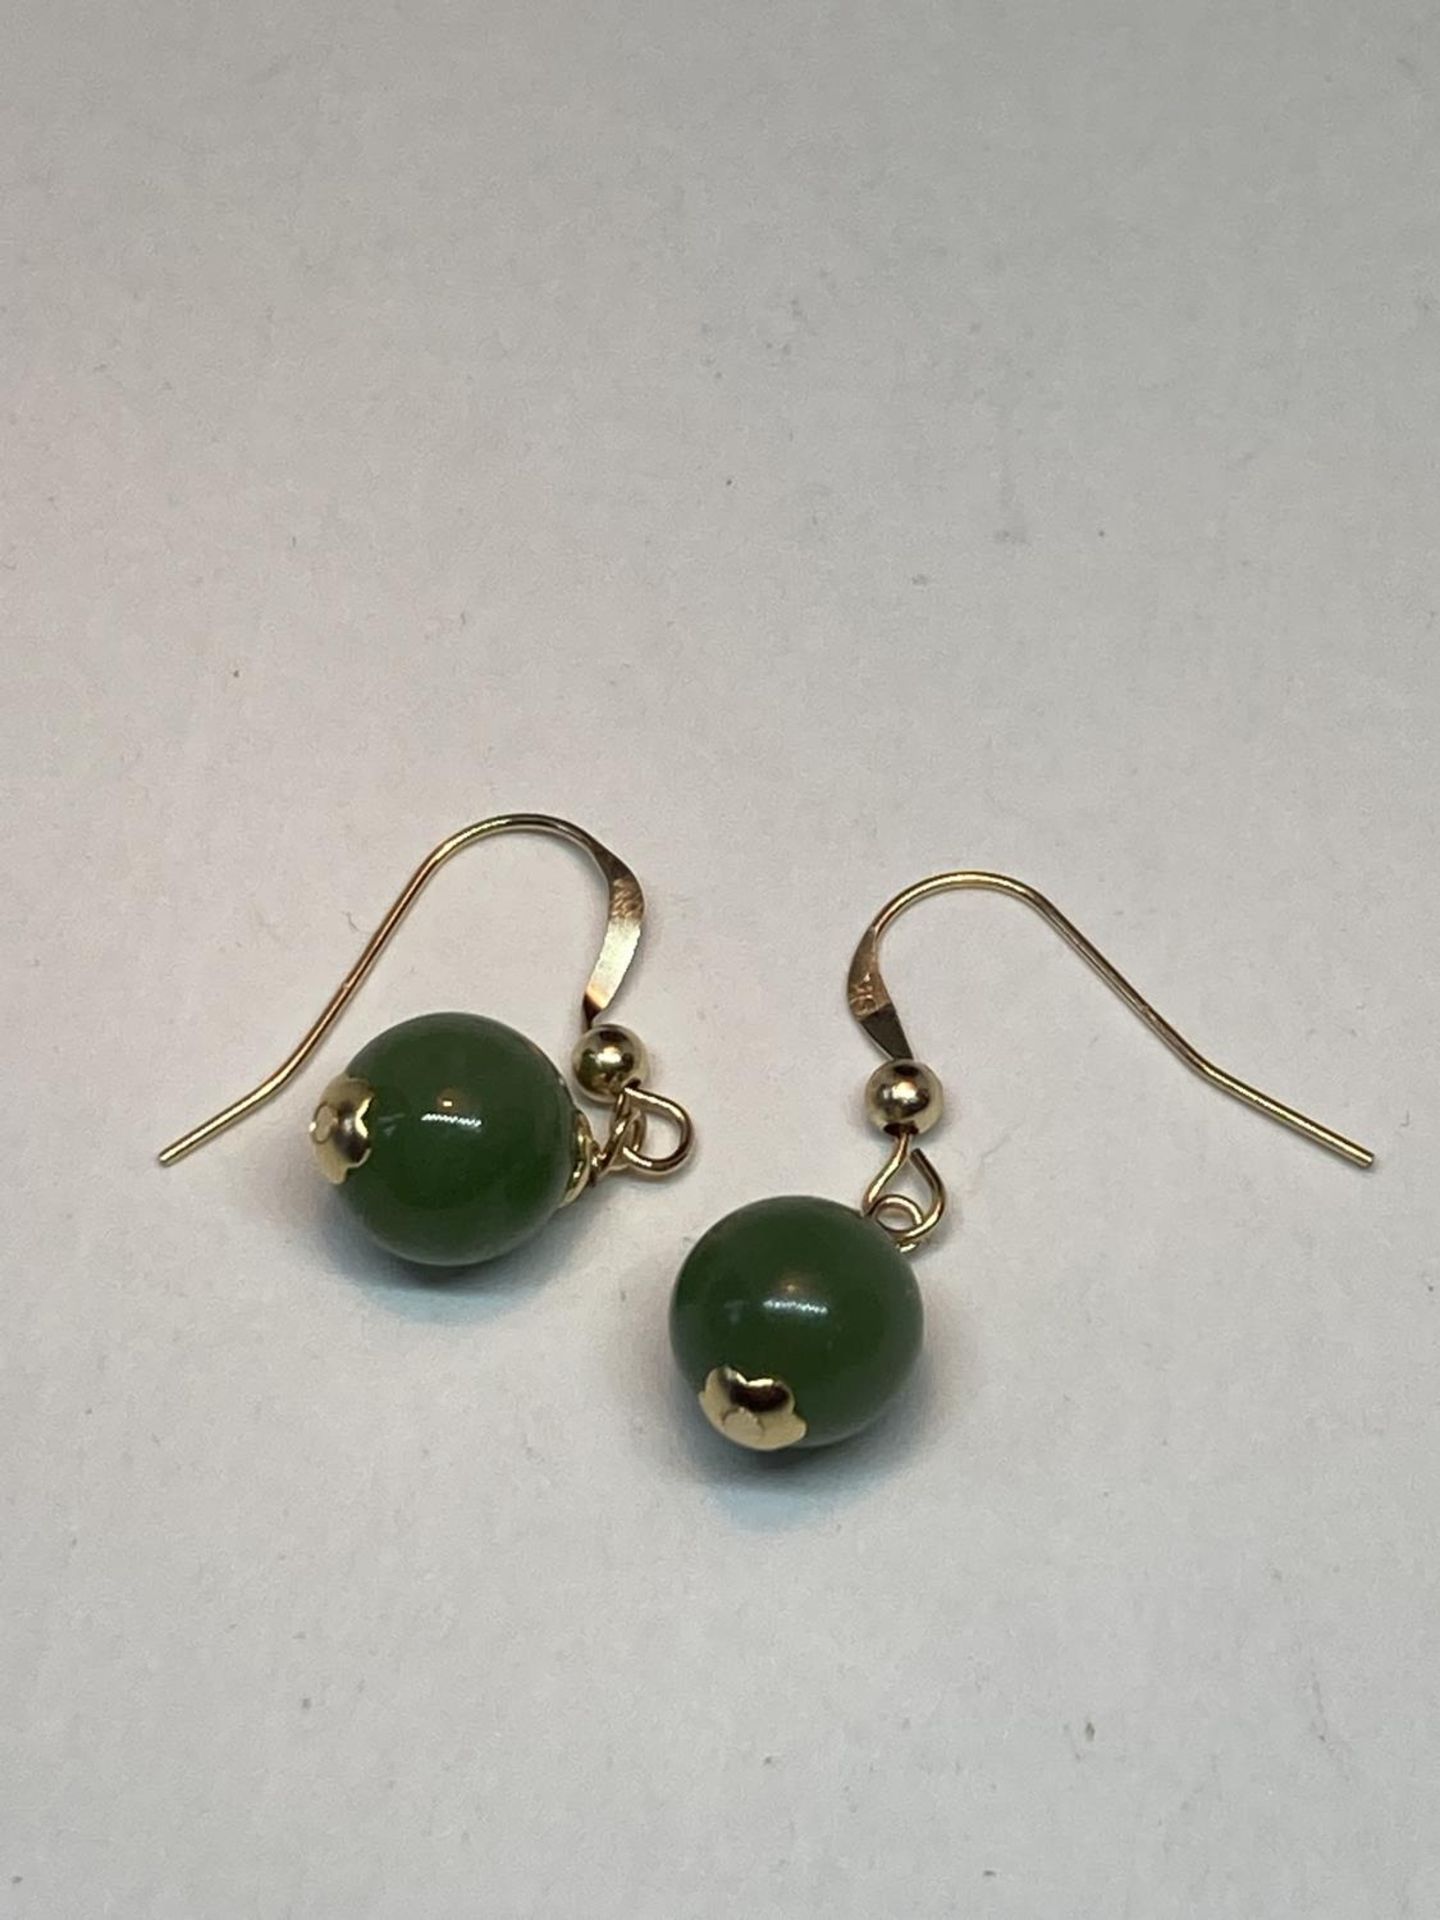 A PAIR OF MARKED 9K EARRINGS WITH GREEN CHALCEDONY STONES